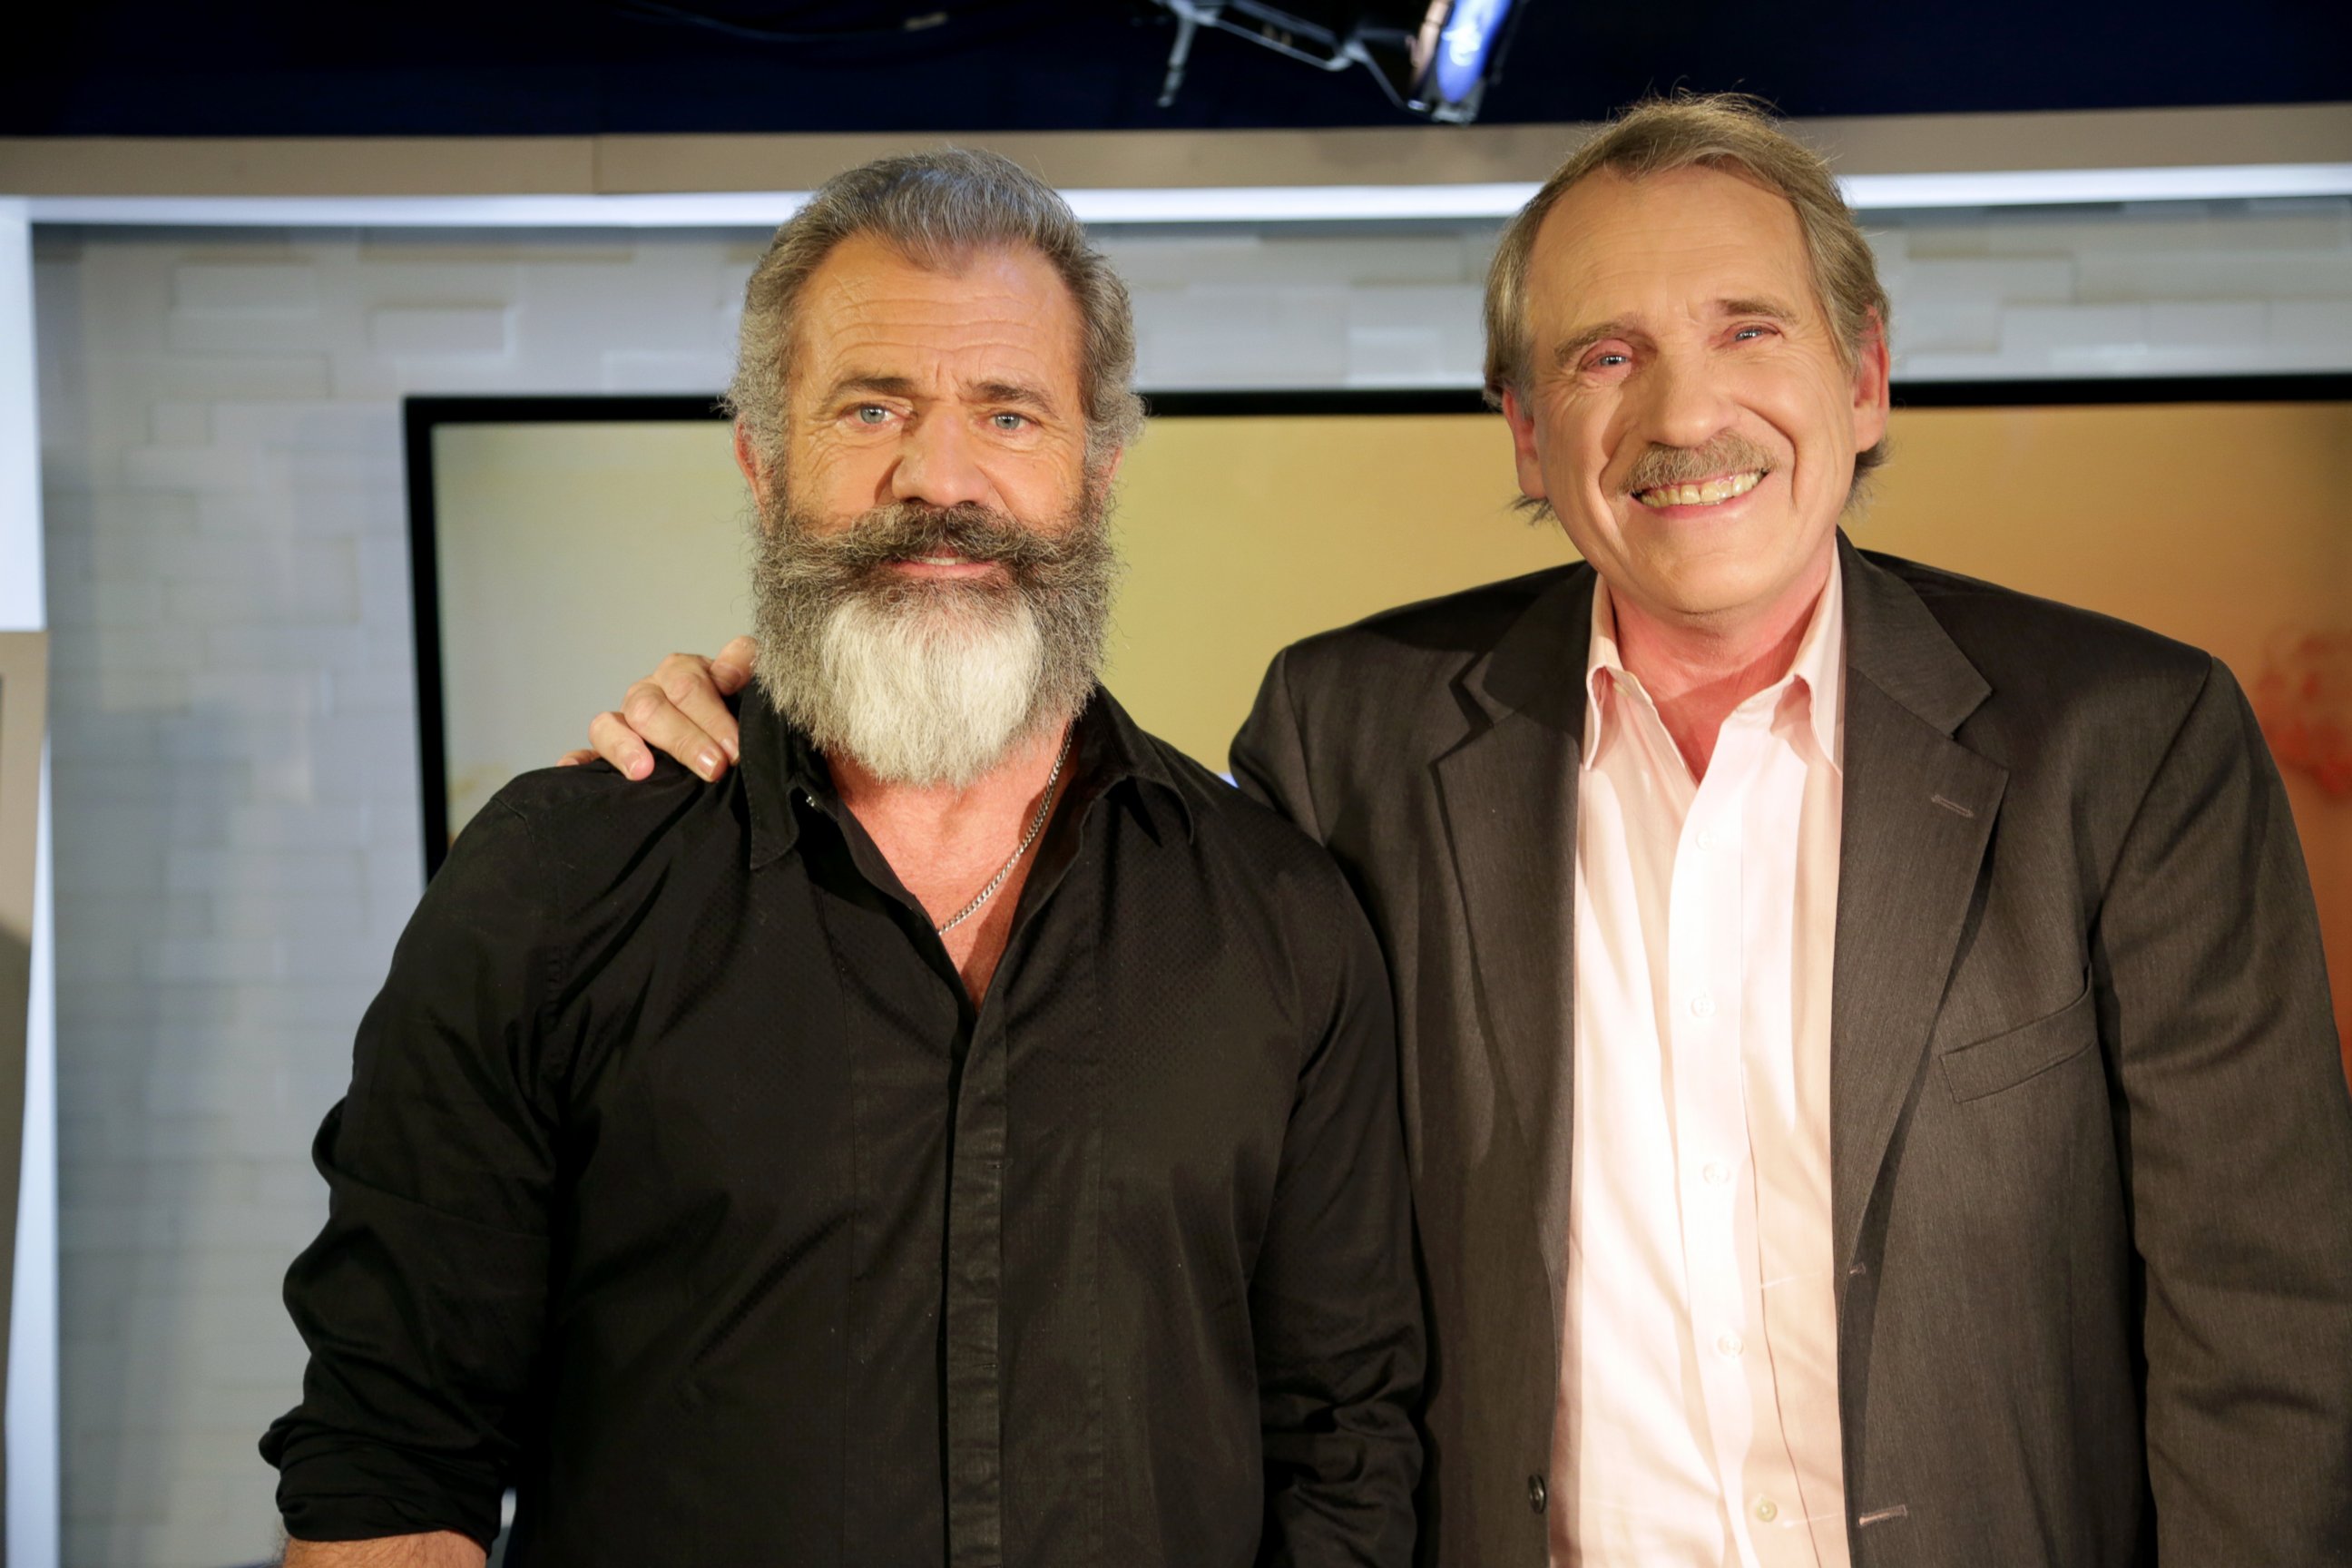 PHOTO: Mel Gibson stopped by ABC News' "Popcorn With Peter Travers" to discuss his new film "Hacksaw Ridge" and his career in entertainment.